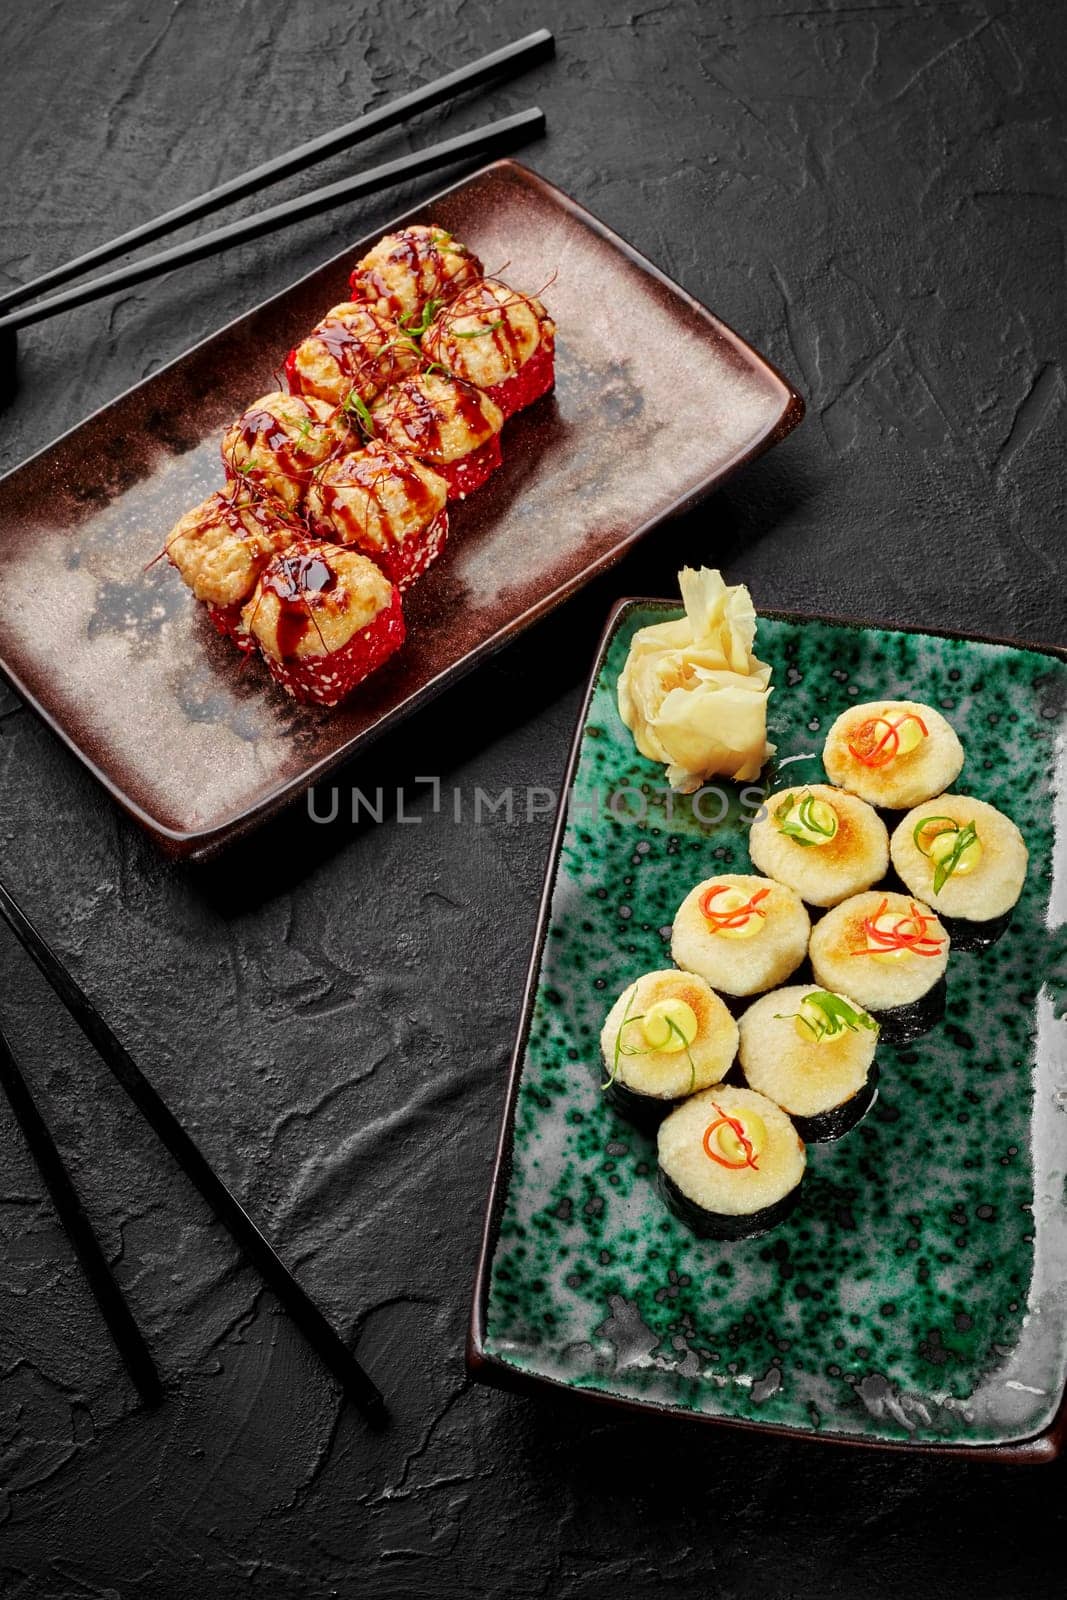 Two kinds of appetizing baked sushi rolls with soft golden cheese hats garnished with spicy mayo, vegetable shavings and chili threads served on colorful ceramic plates on black background